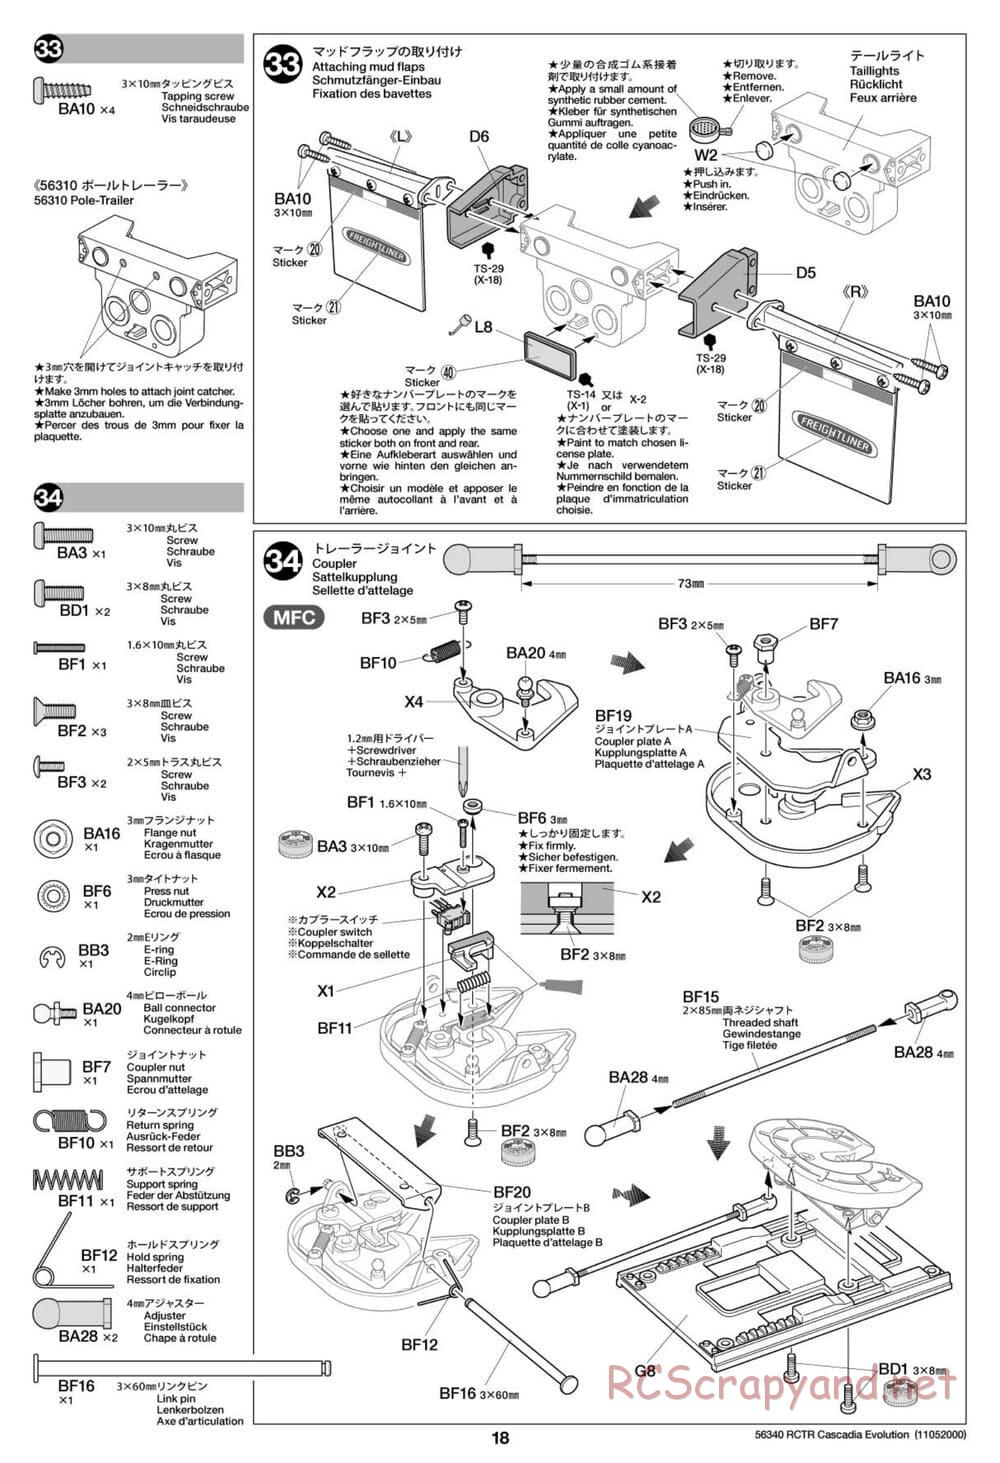 Tamiya - Freightliner Cascadia Evolution Tractor Truck Chassis - Manual - Page 18